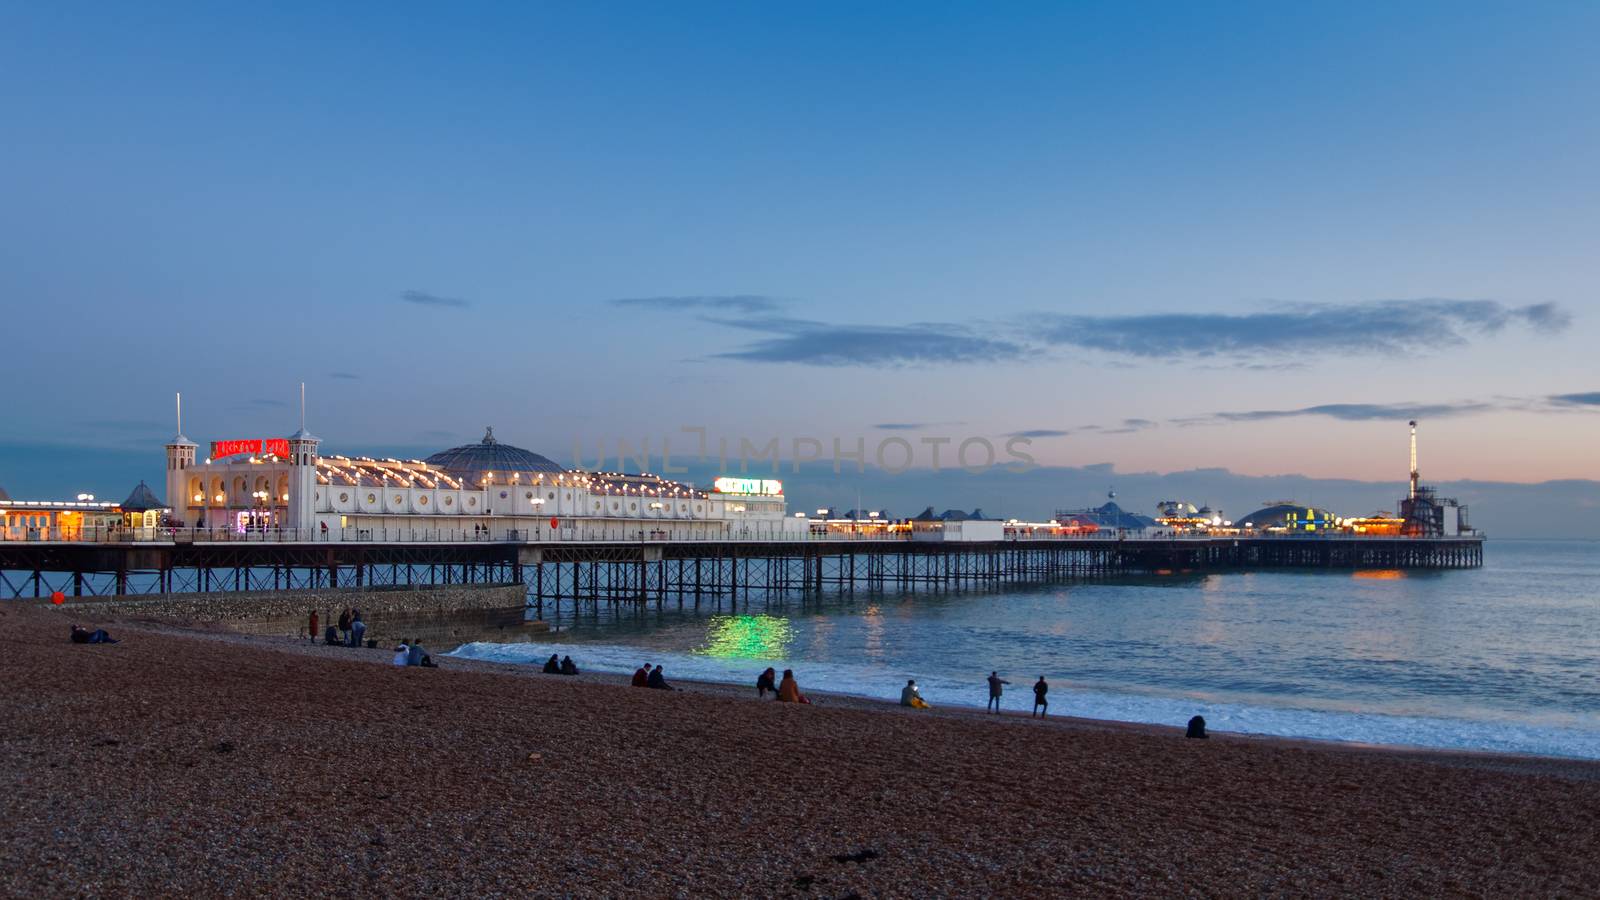 BRIGHTON, EAST SUSSEX/UK - JANUARY 26 : View of Brighton Pier in by phil_bird